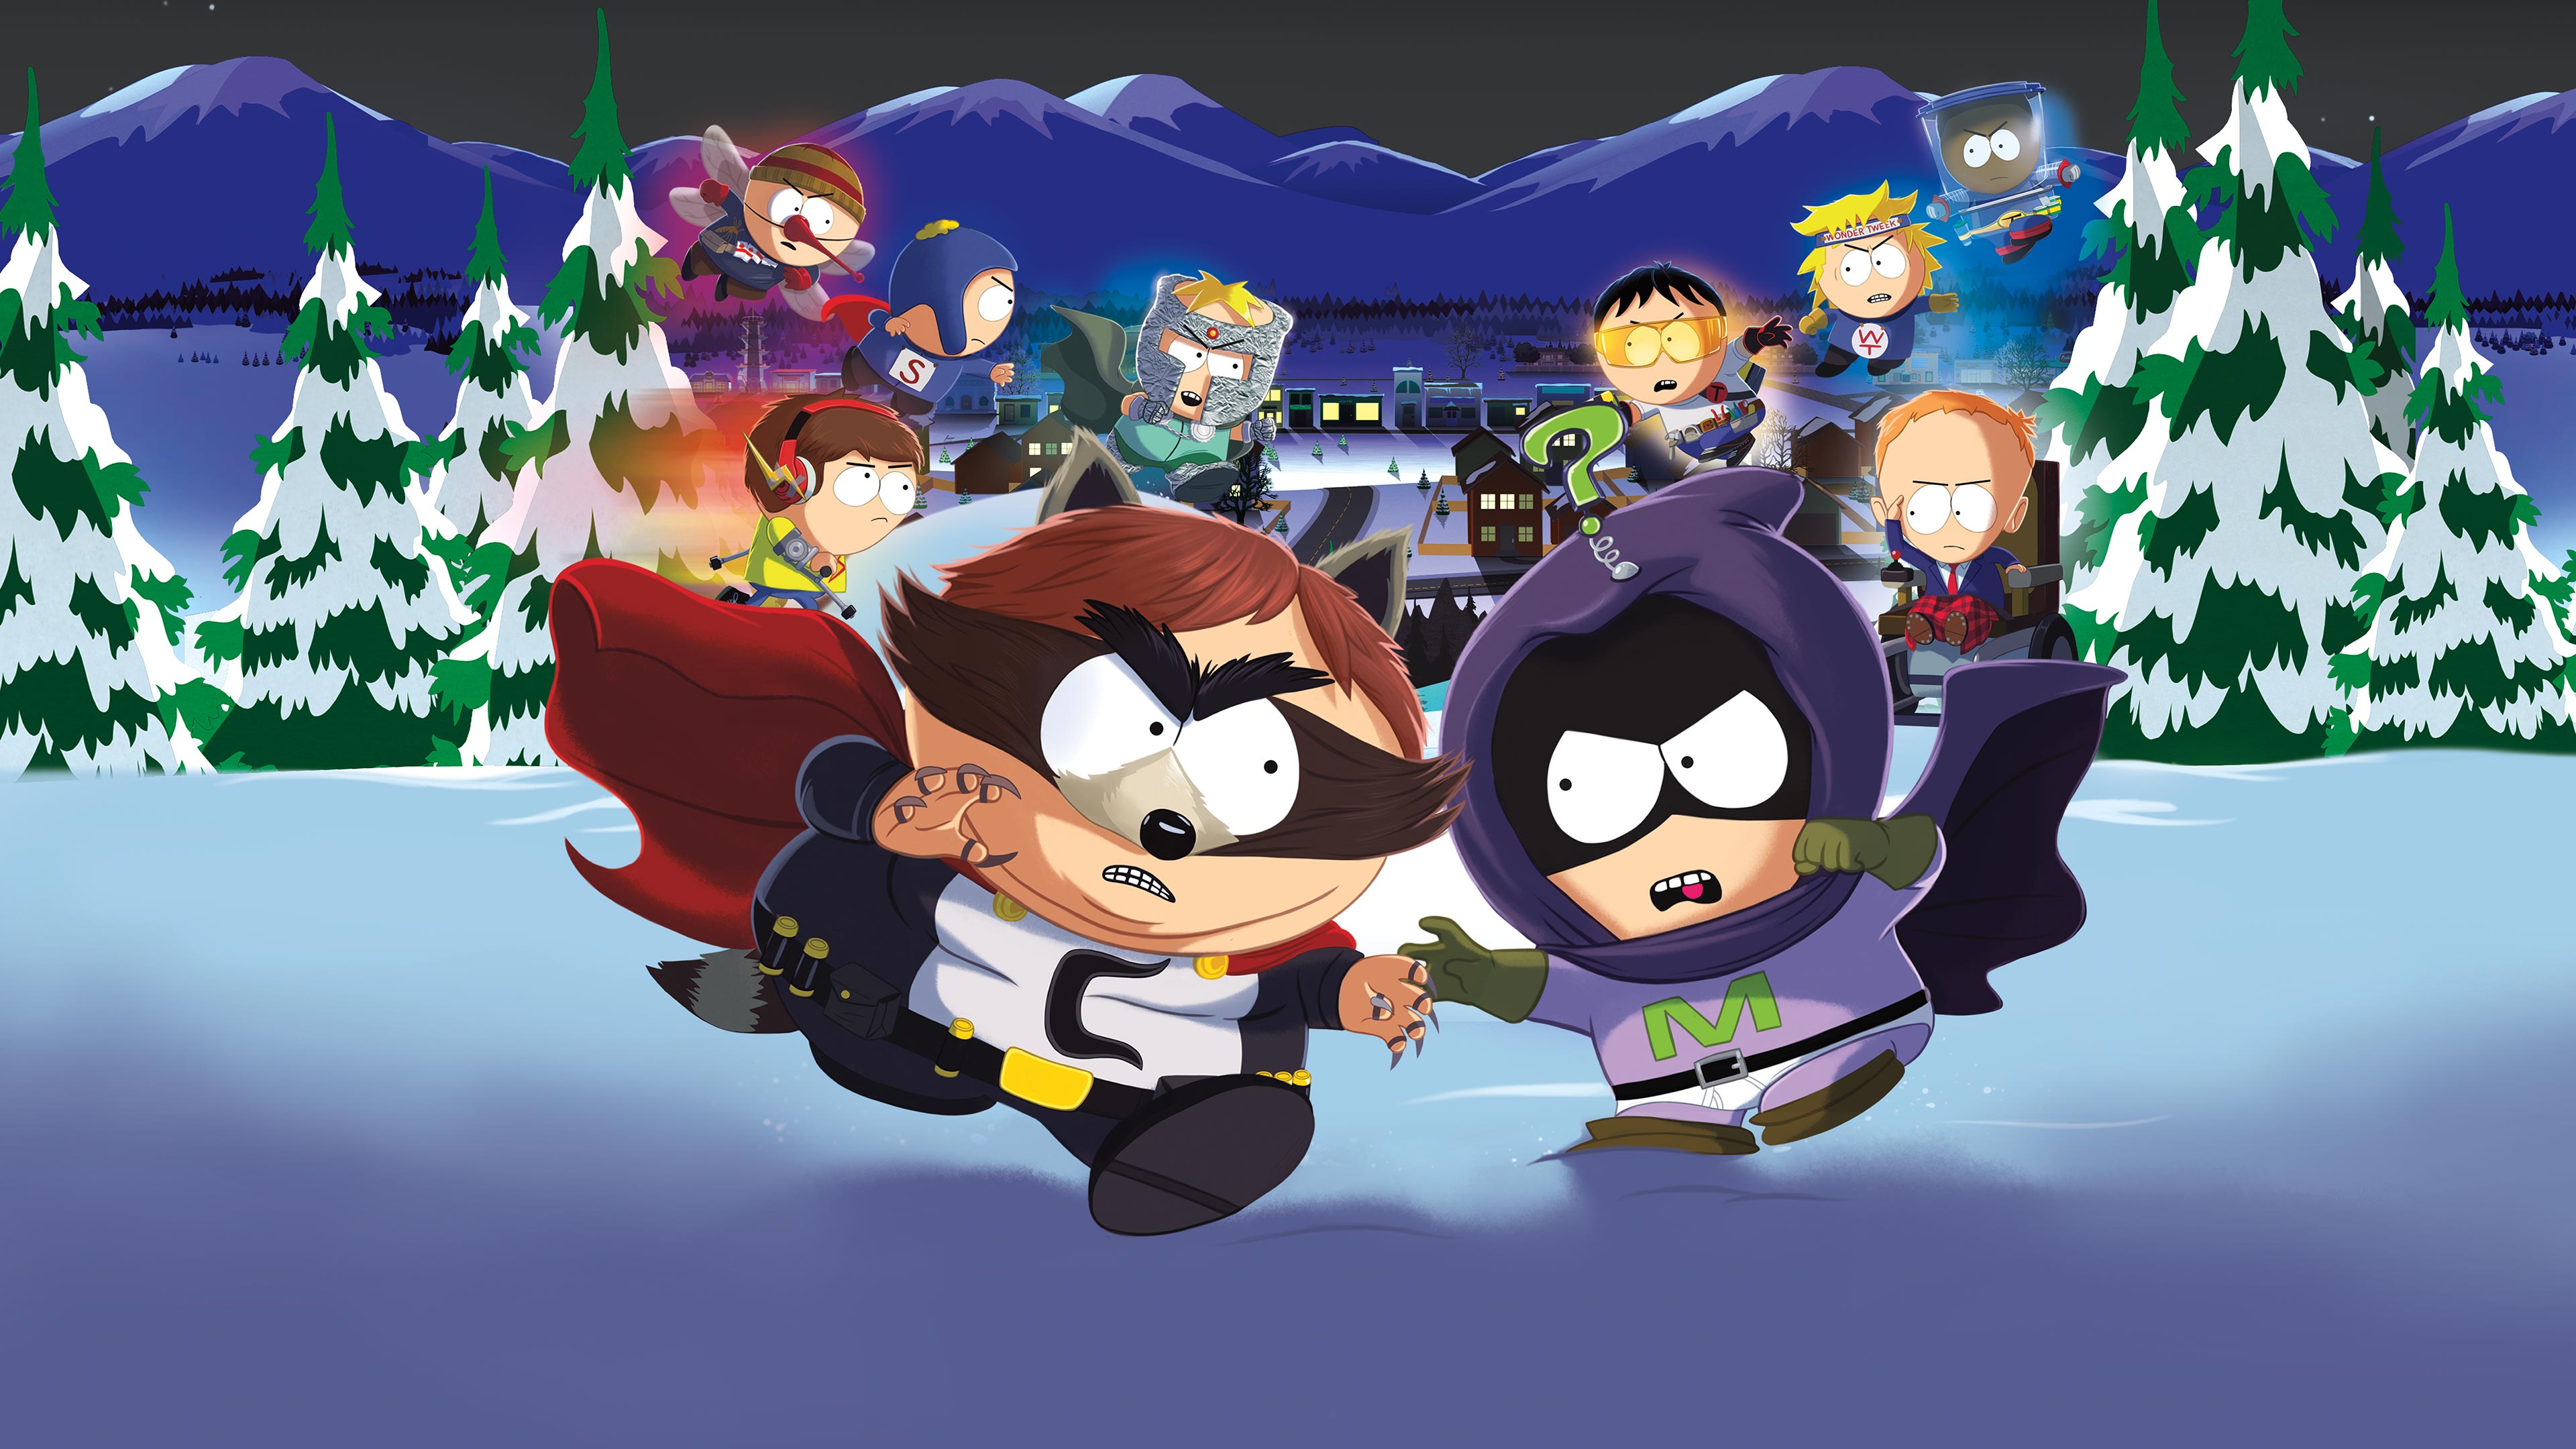 South Park™: The Fractured but Whole™ - Gold Edition